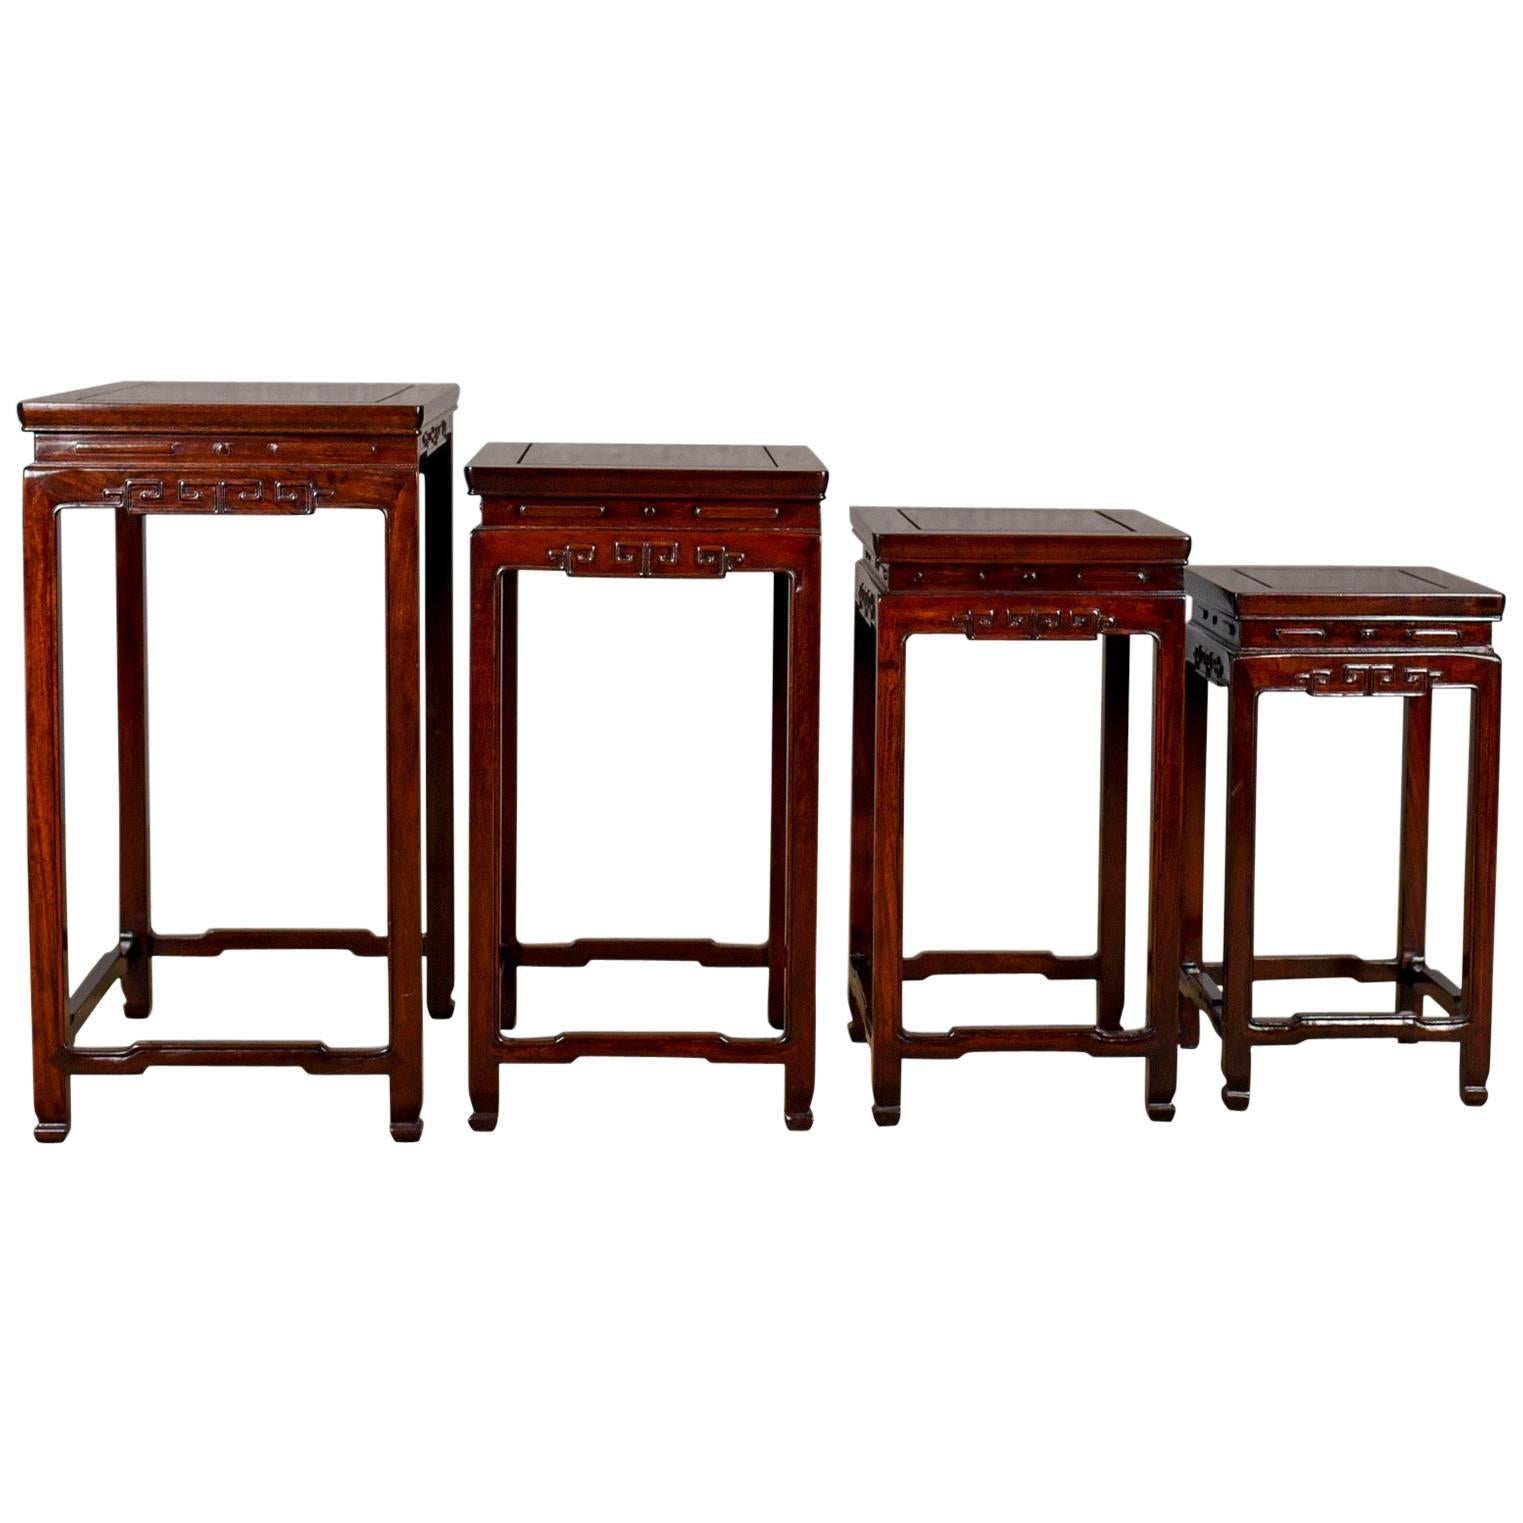 Nest of Tables, Oriental Influence, Chinese Rosewood, Side, Late 20th Century